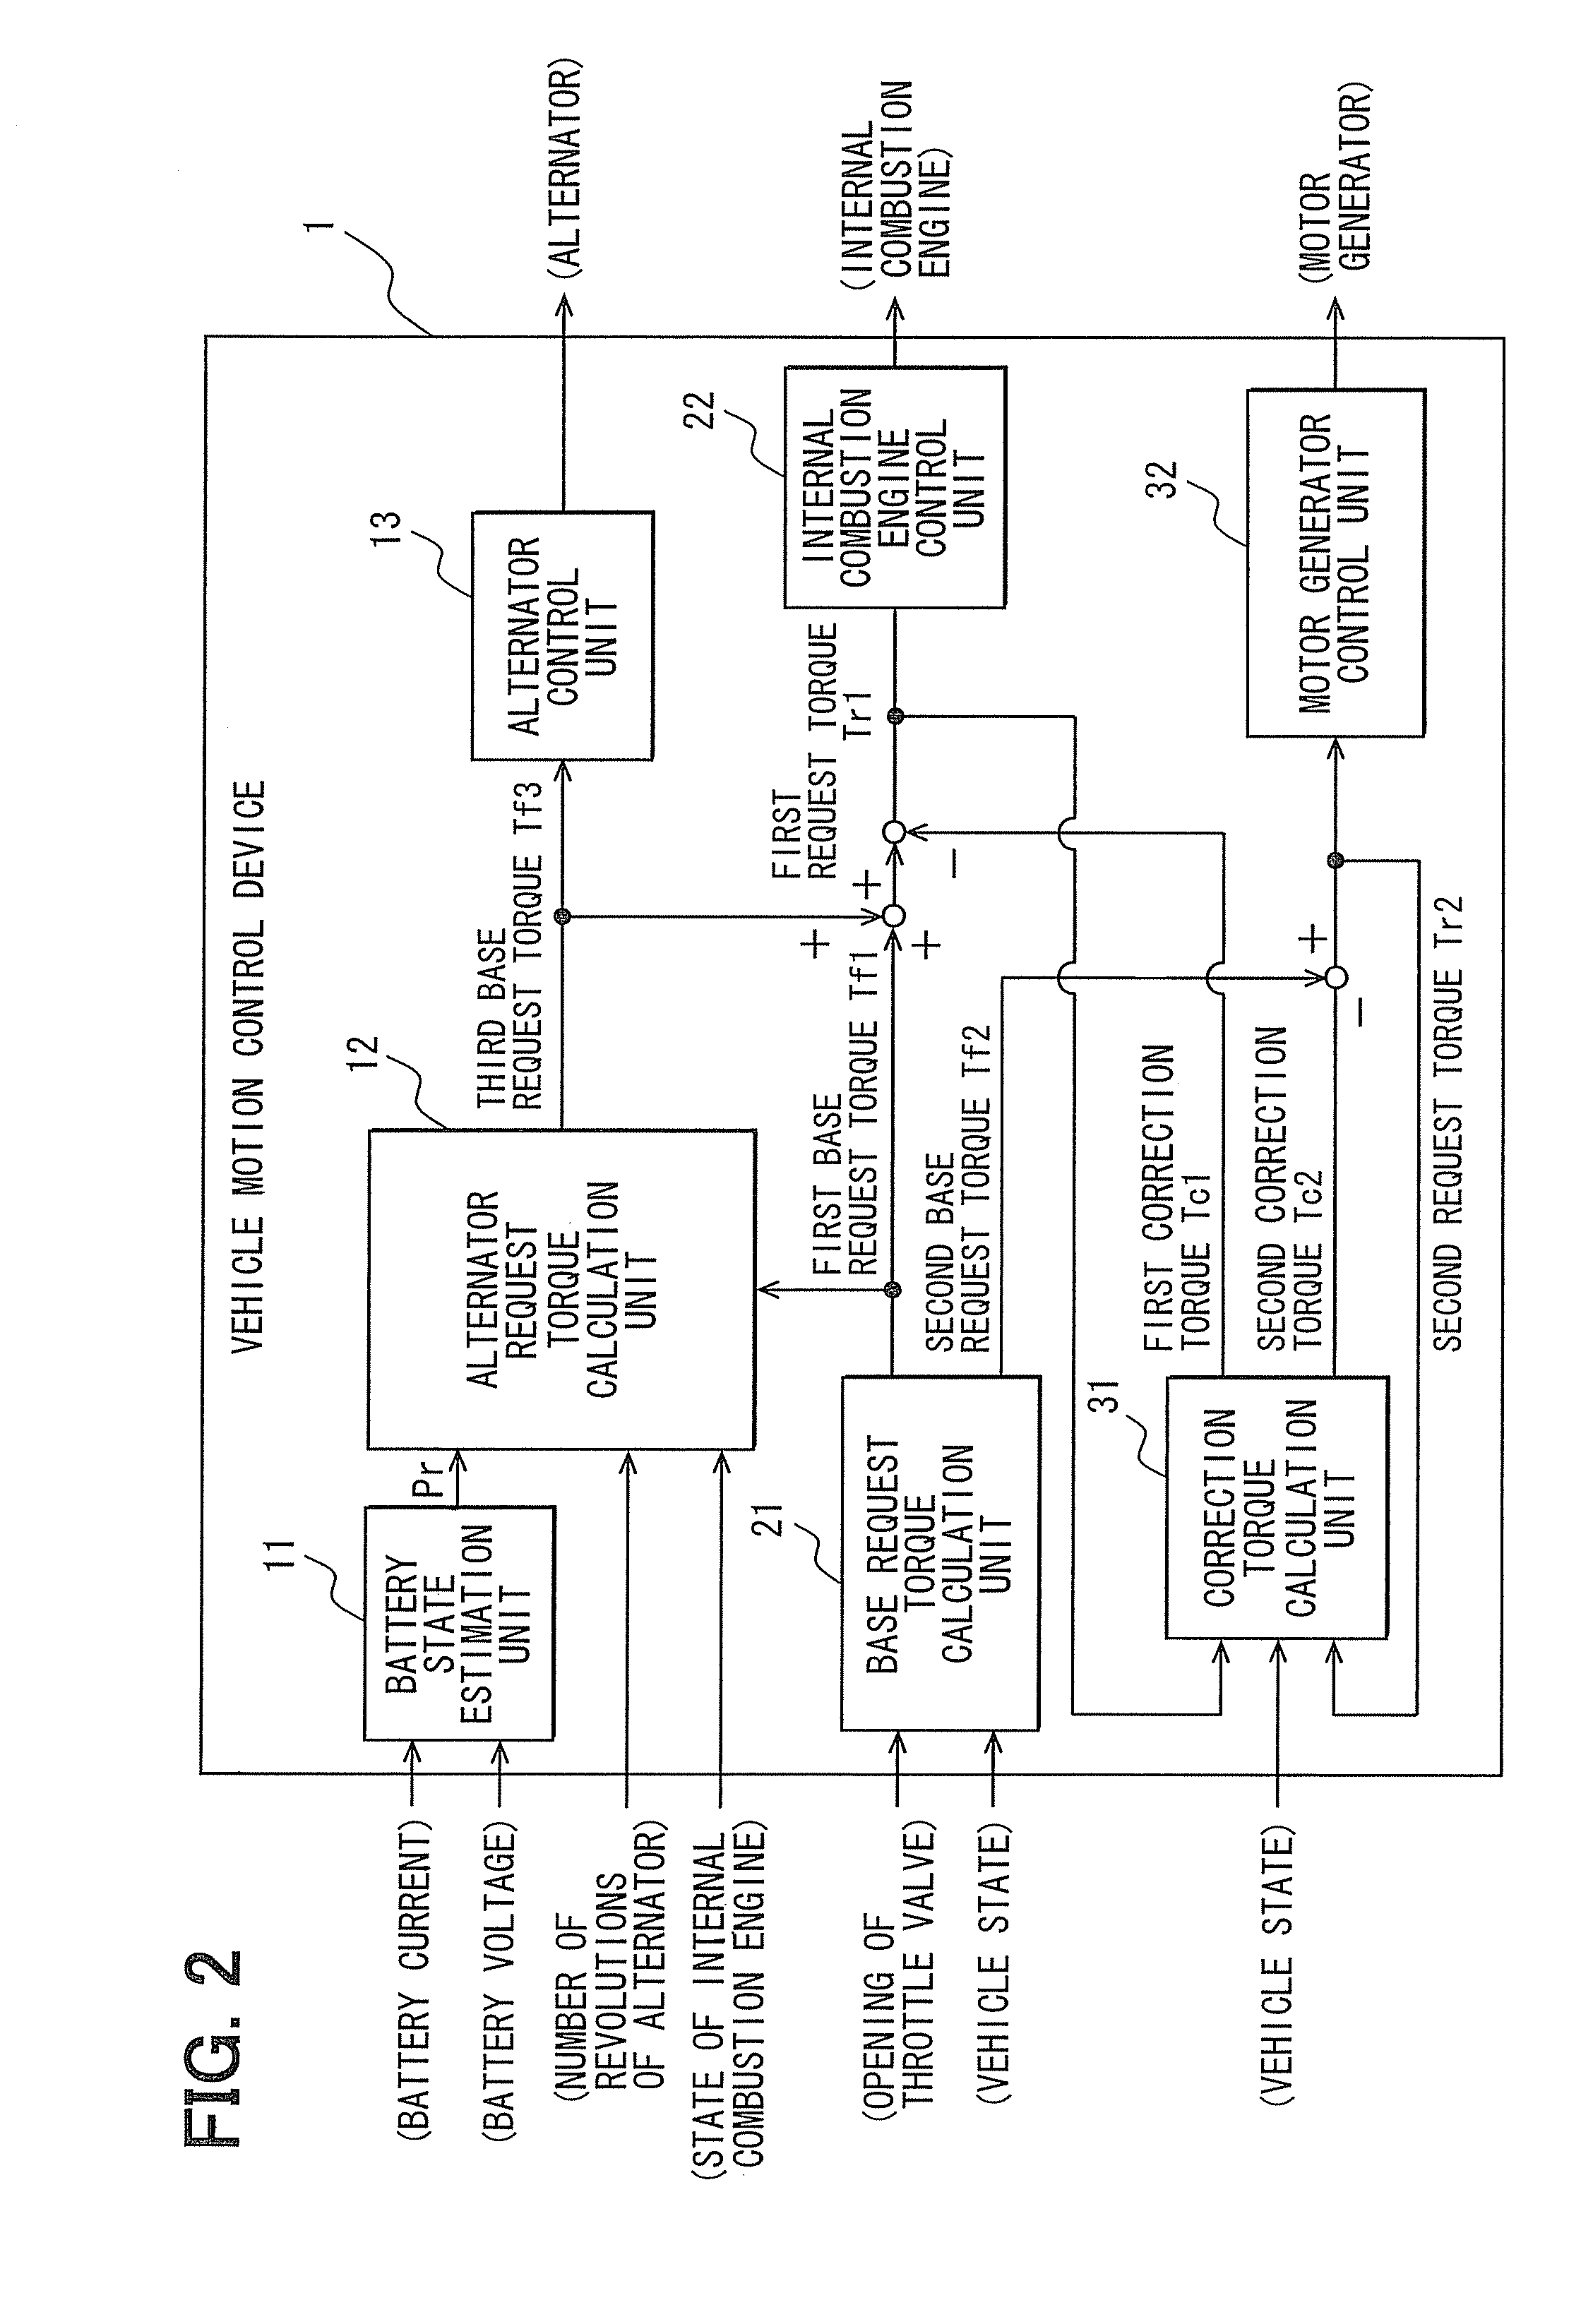 Vehicle motion control device